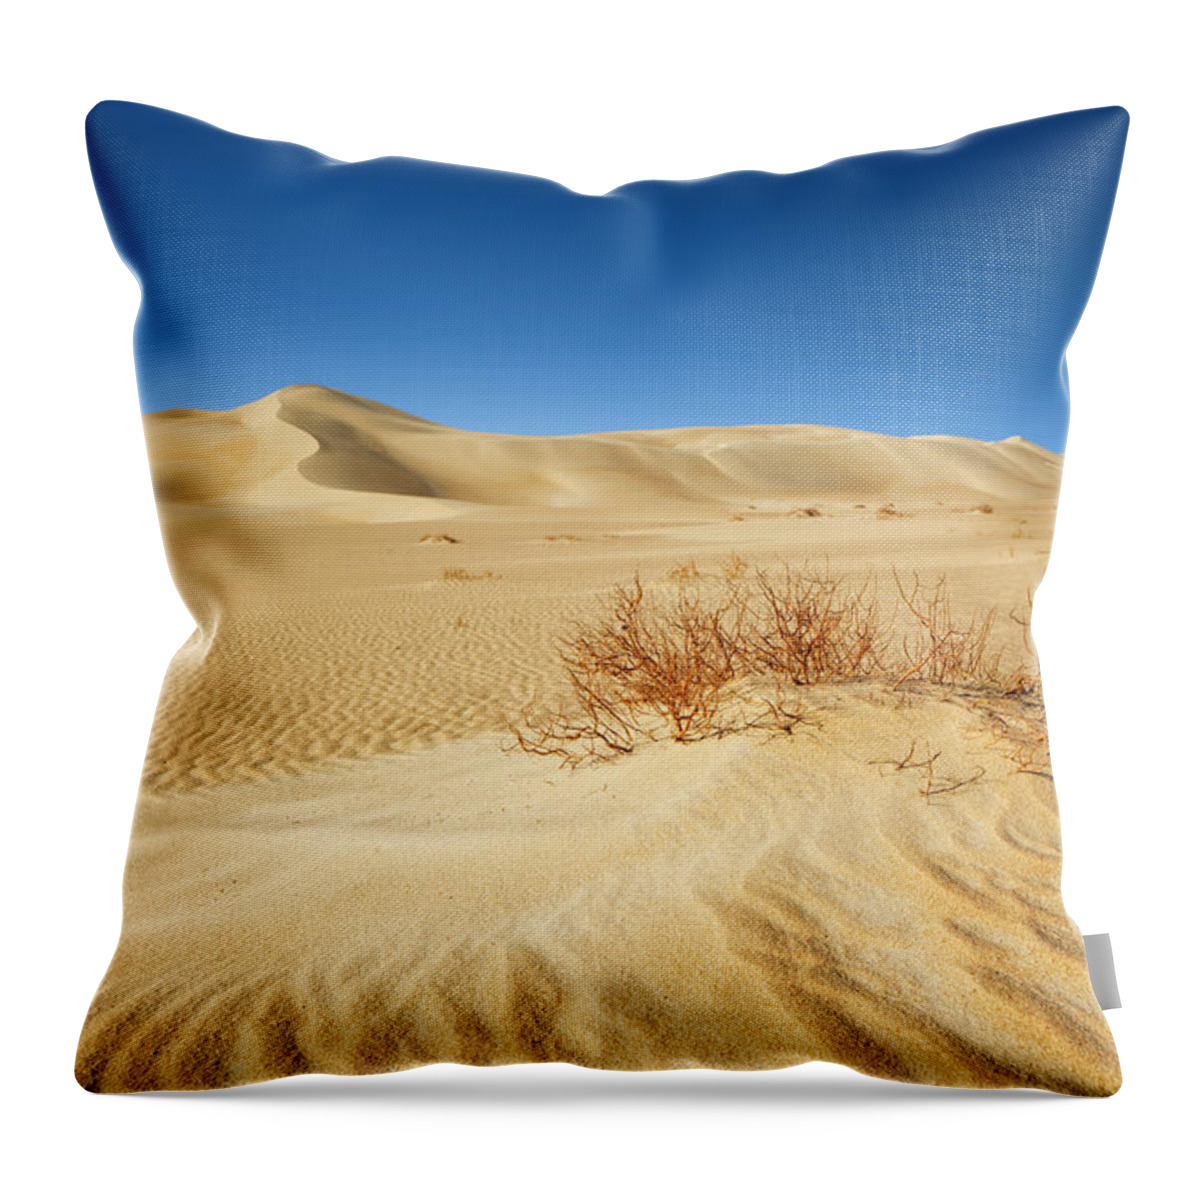 Scenics Throw Pillow featuring the photograph Desert by Cinoby